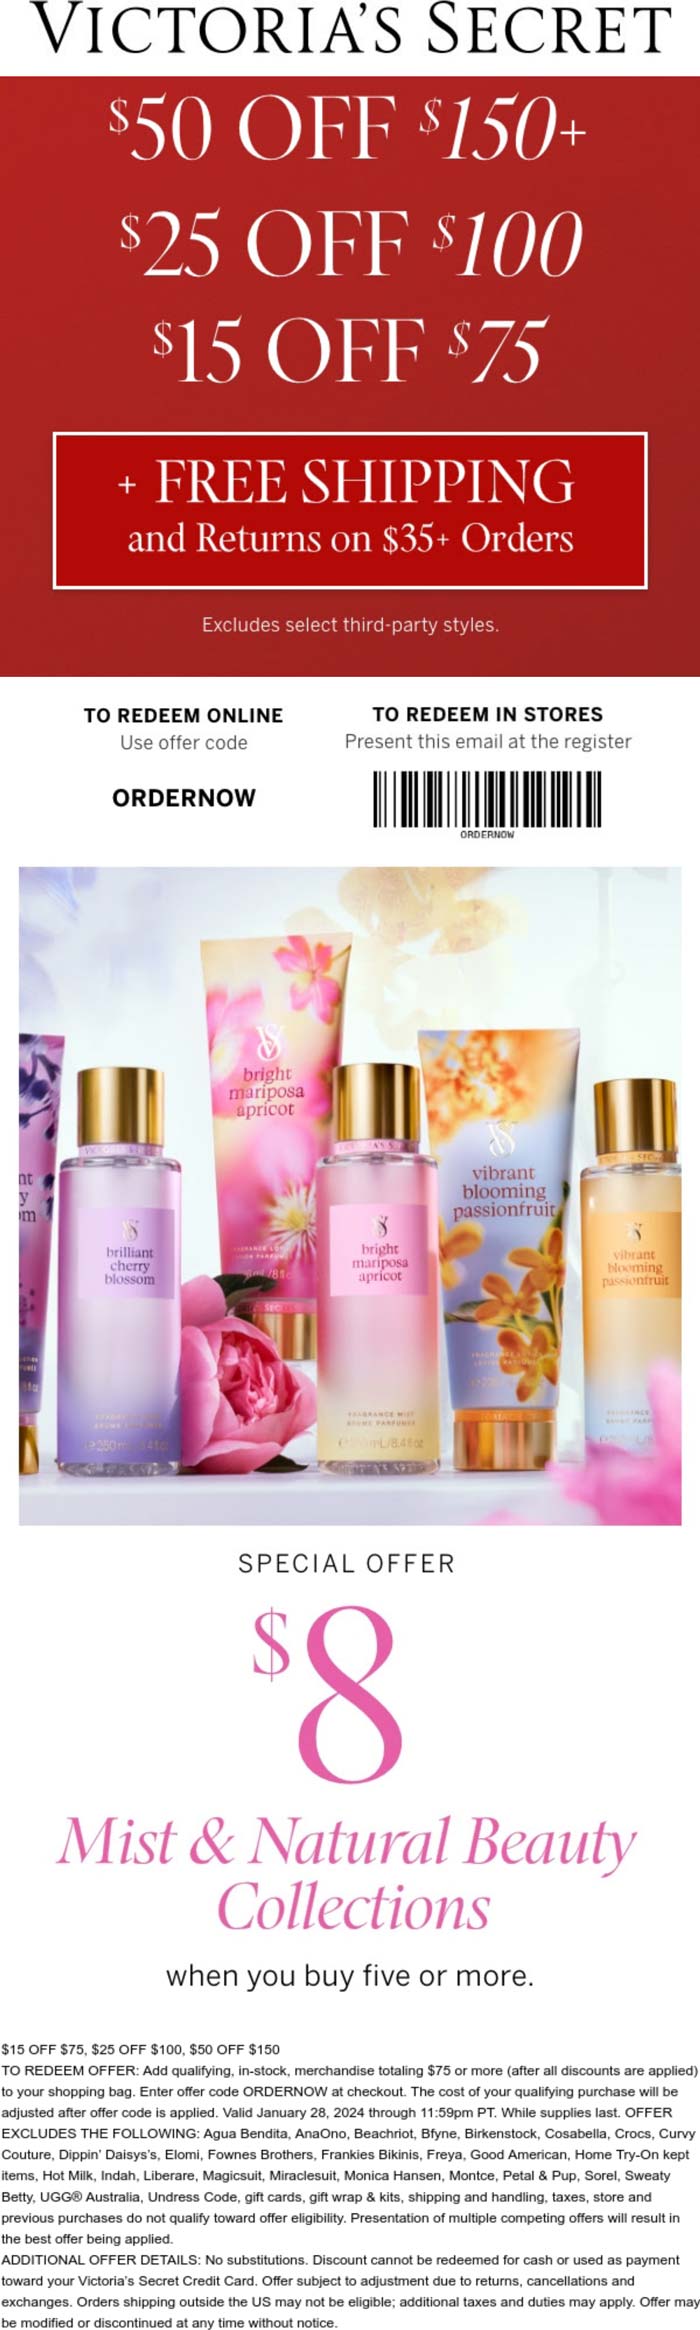 Victorias Secret stores Coupon  $15-$50 off $75+ today at Victorias Secret, ditto online #victoriassecret 